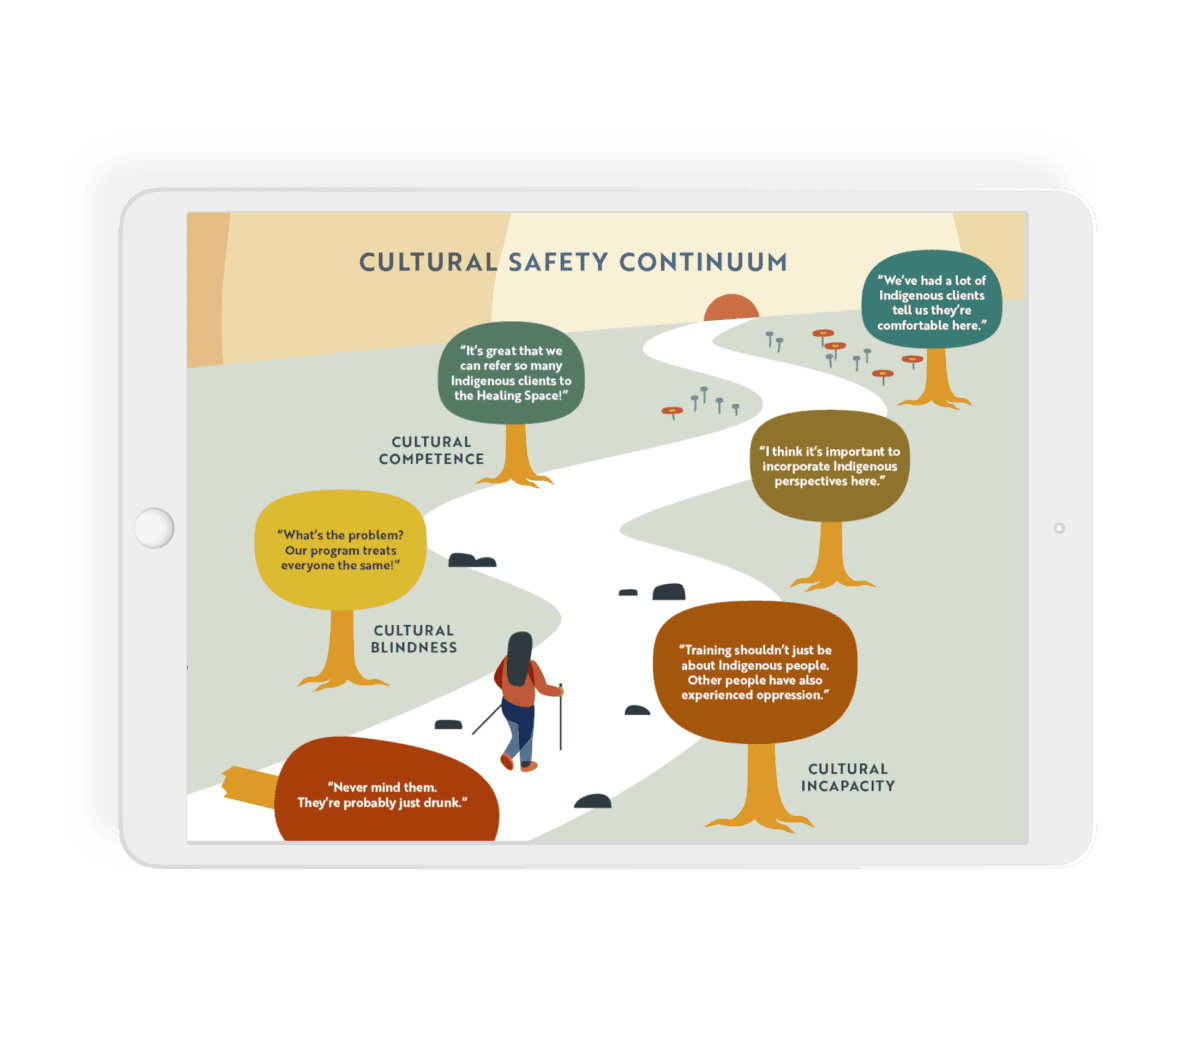 An iPad mockup of a Cultural Safety Continuum graphic. The graphic features a person walking along a path dotted with trees. Each tree represents some statements from programs that are not culturally safe in red and yellow trees that turn to inclusive trees including phrases like 'What's the problem? Our program treats everyone the same!' and later down the line, 'It's great that we can refer so many Indigenous clients to the Healing Space!'